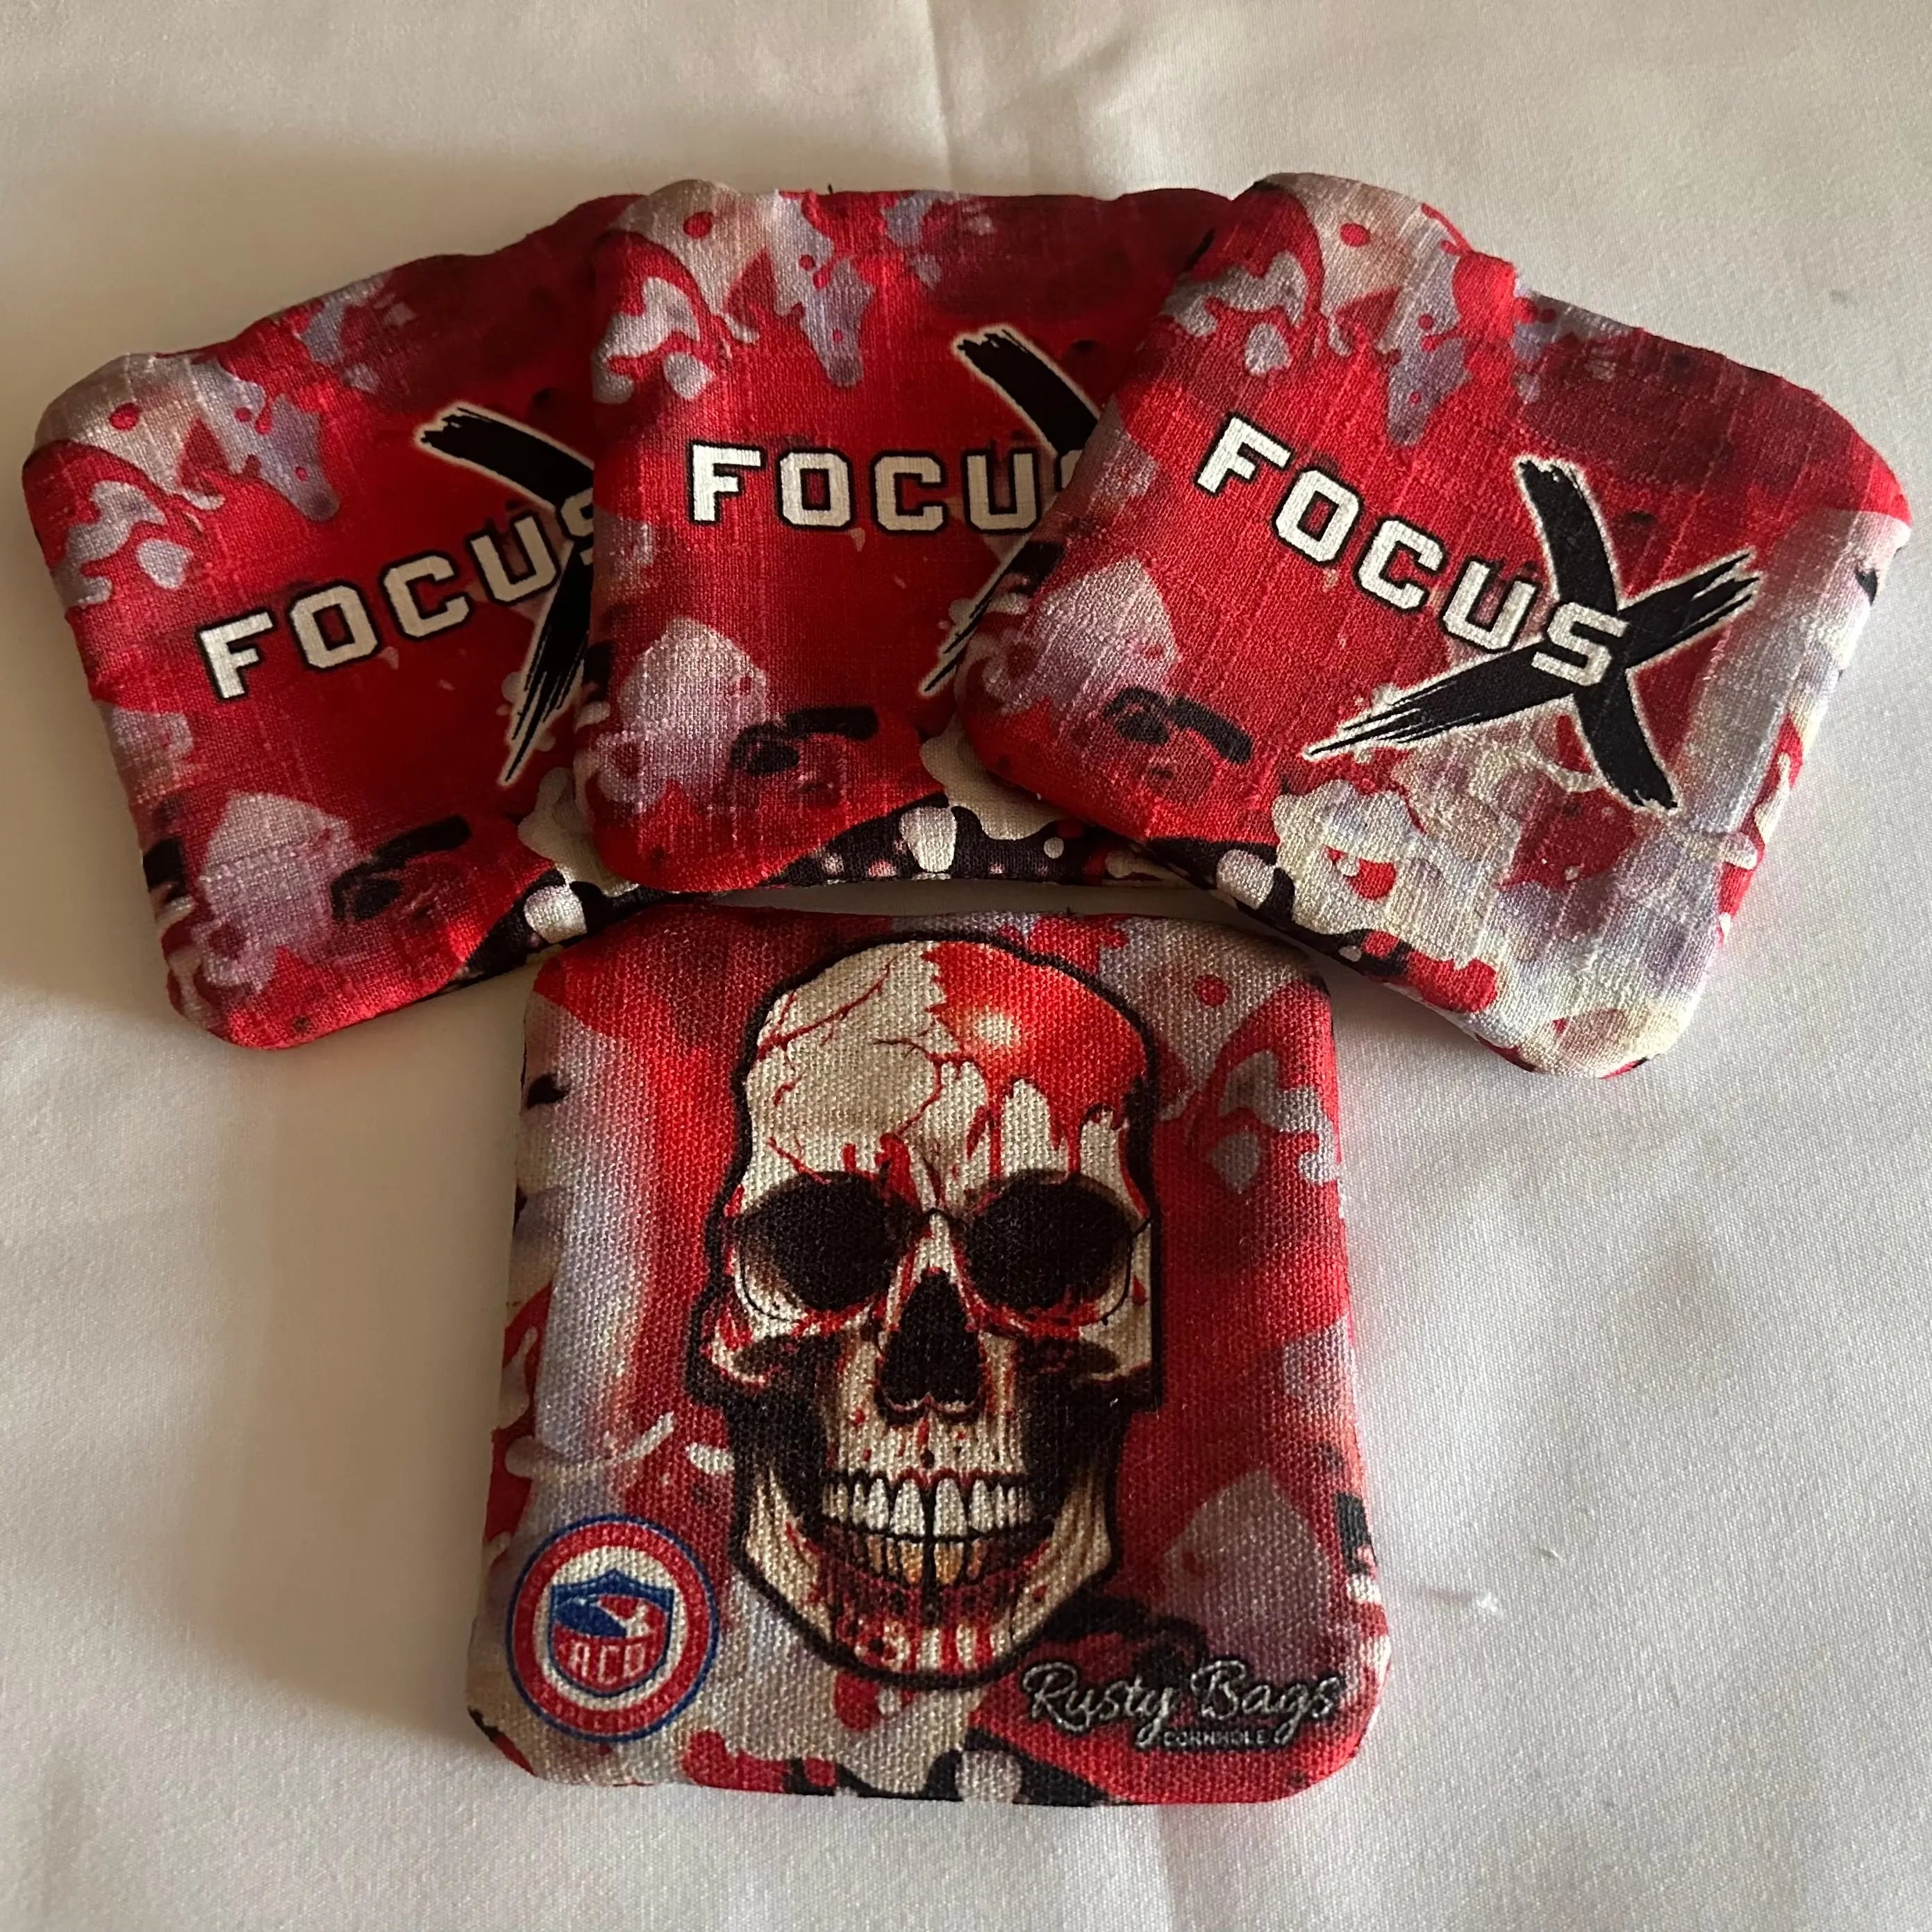 FOCUS X - ACO STAMPED - Pro Cornhole Bags 2 KT Cornhole Wraps and Boards